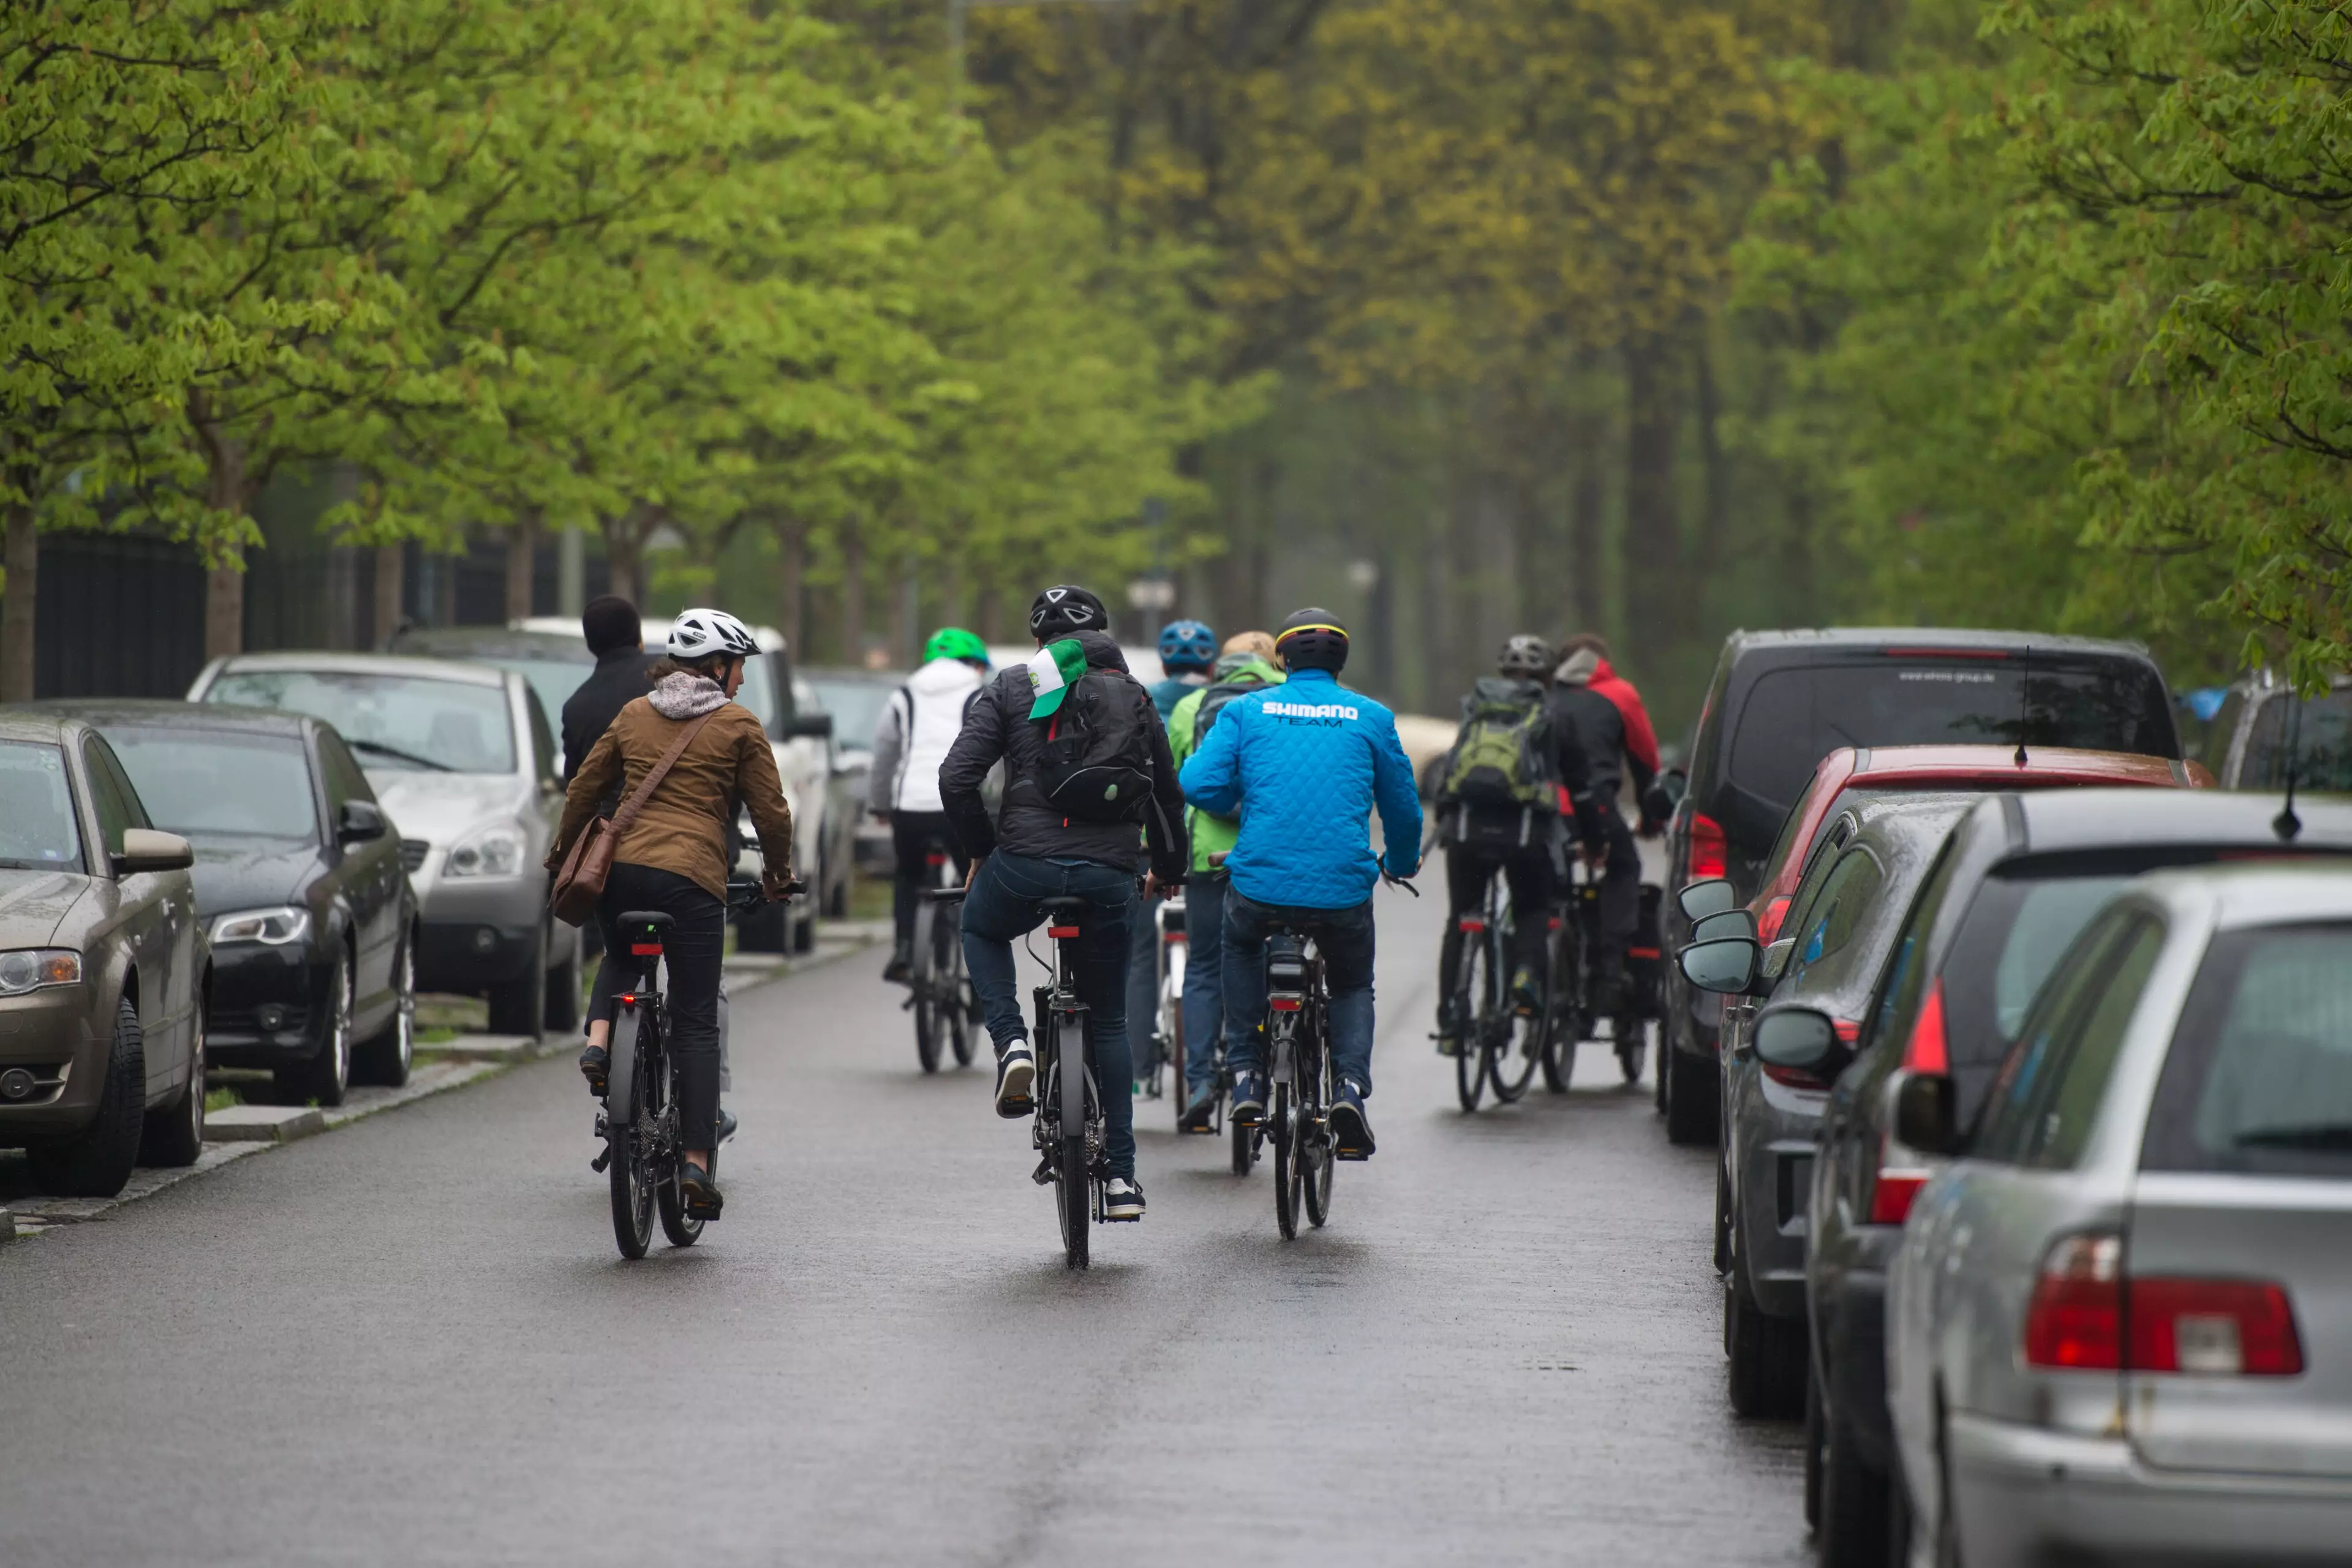 Drivers could be fined £100 for driving too closely to cyclists.